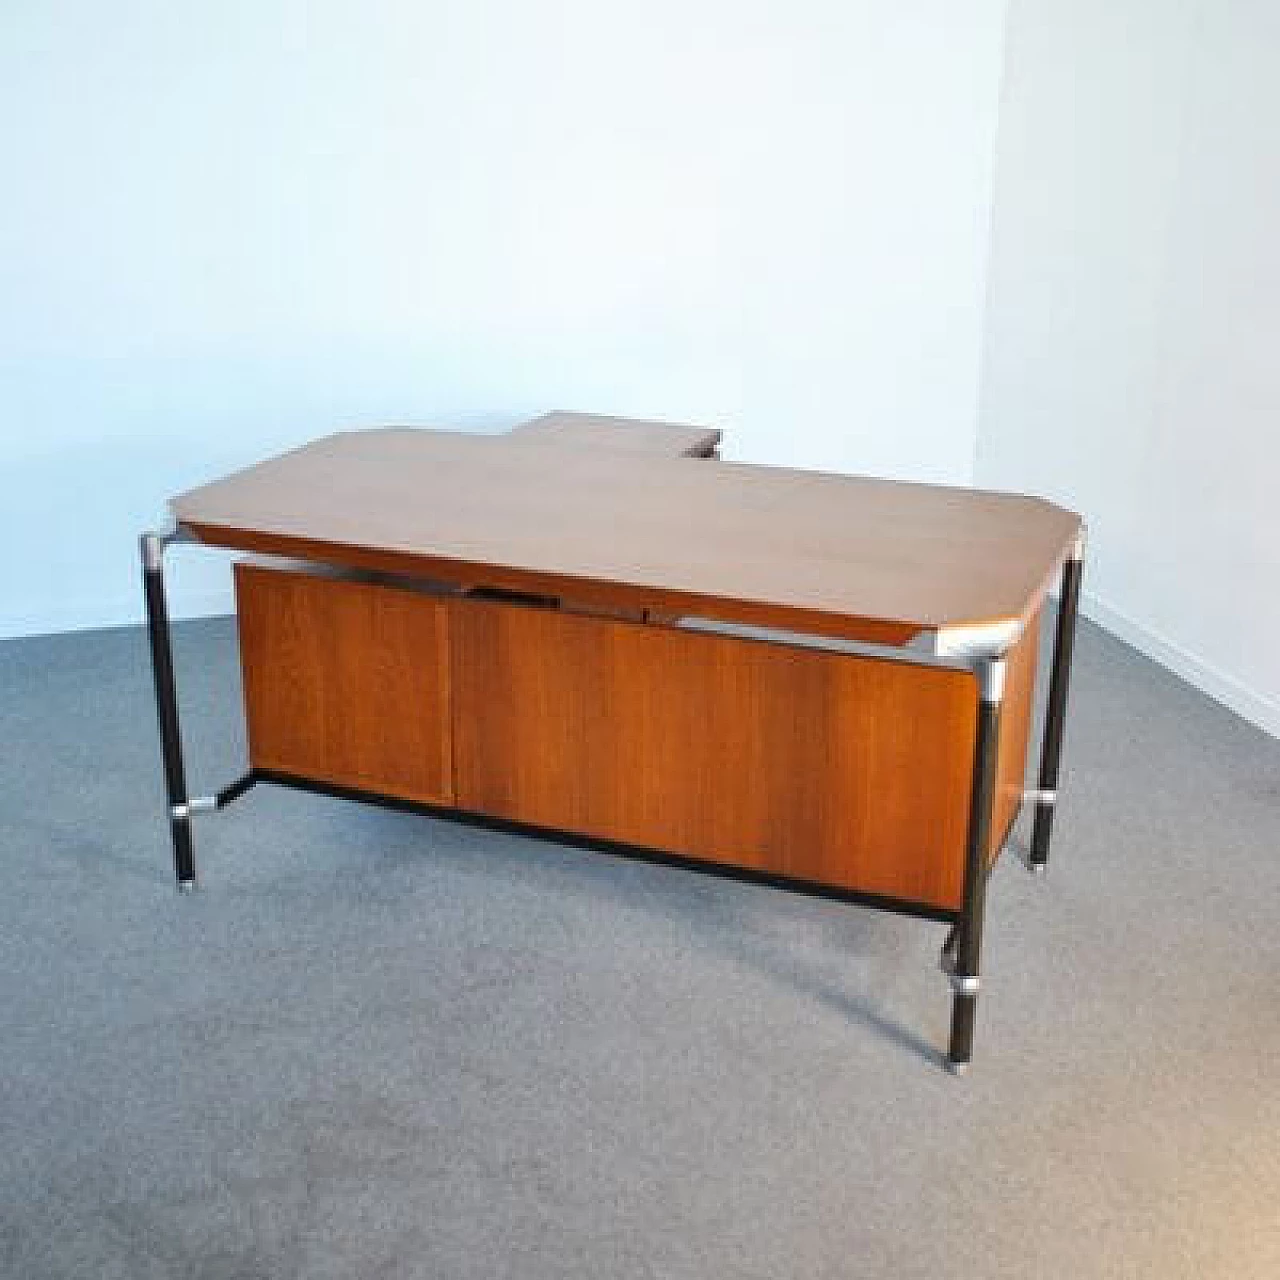 Executive desk by Ico Parisi for MIM Rome, 1950s 1412237